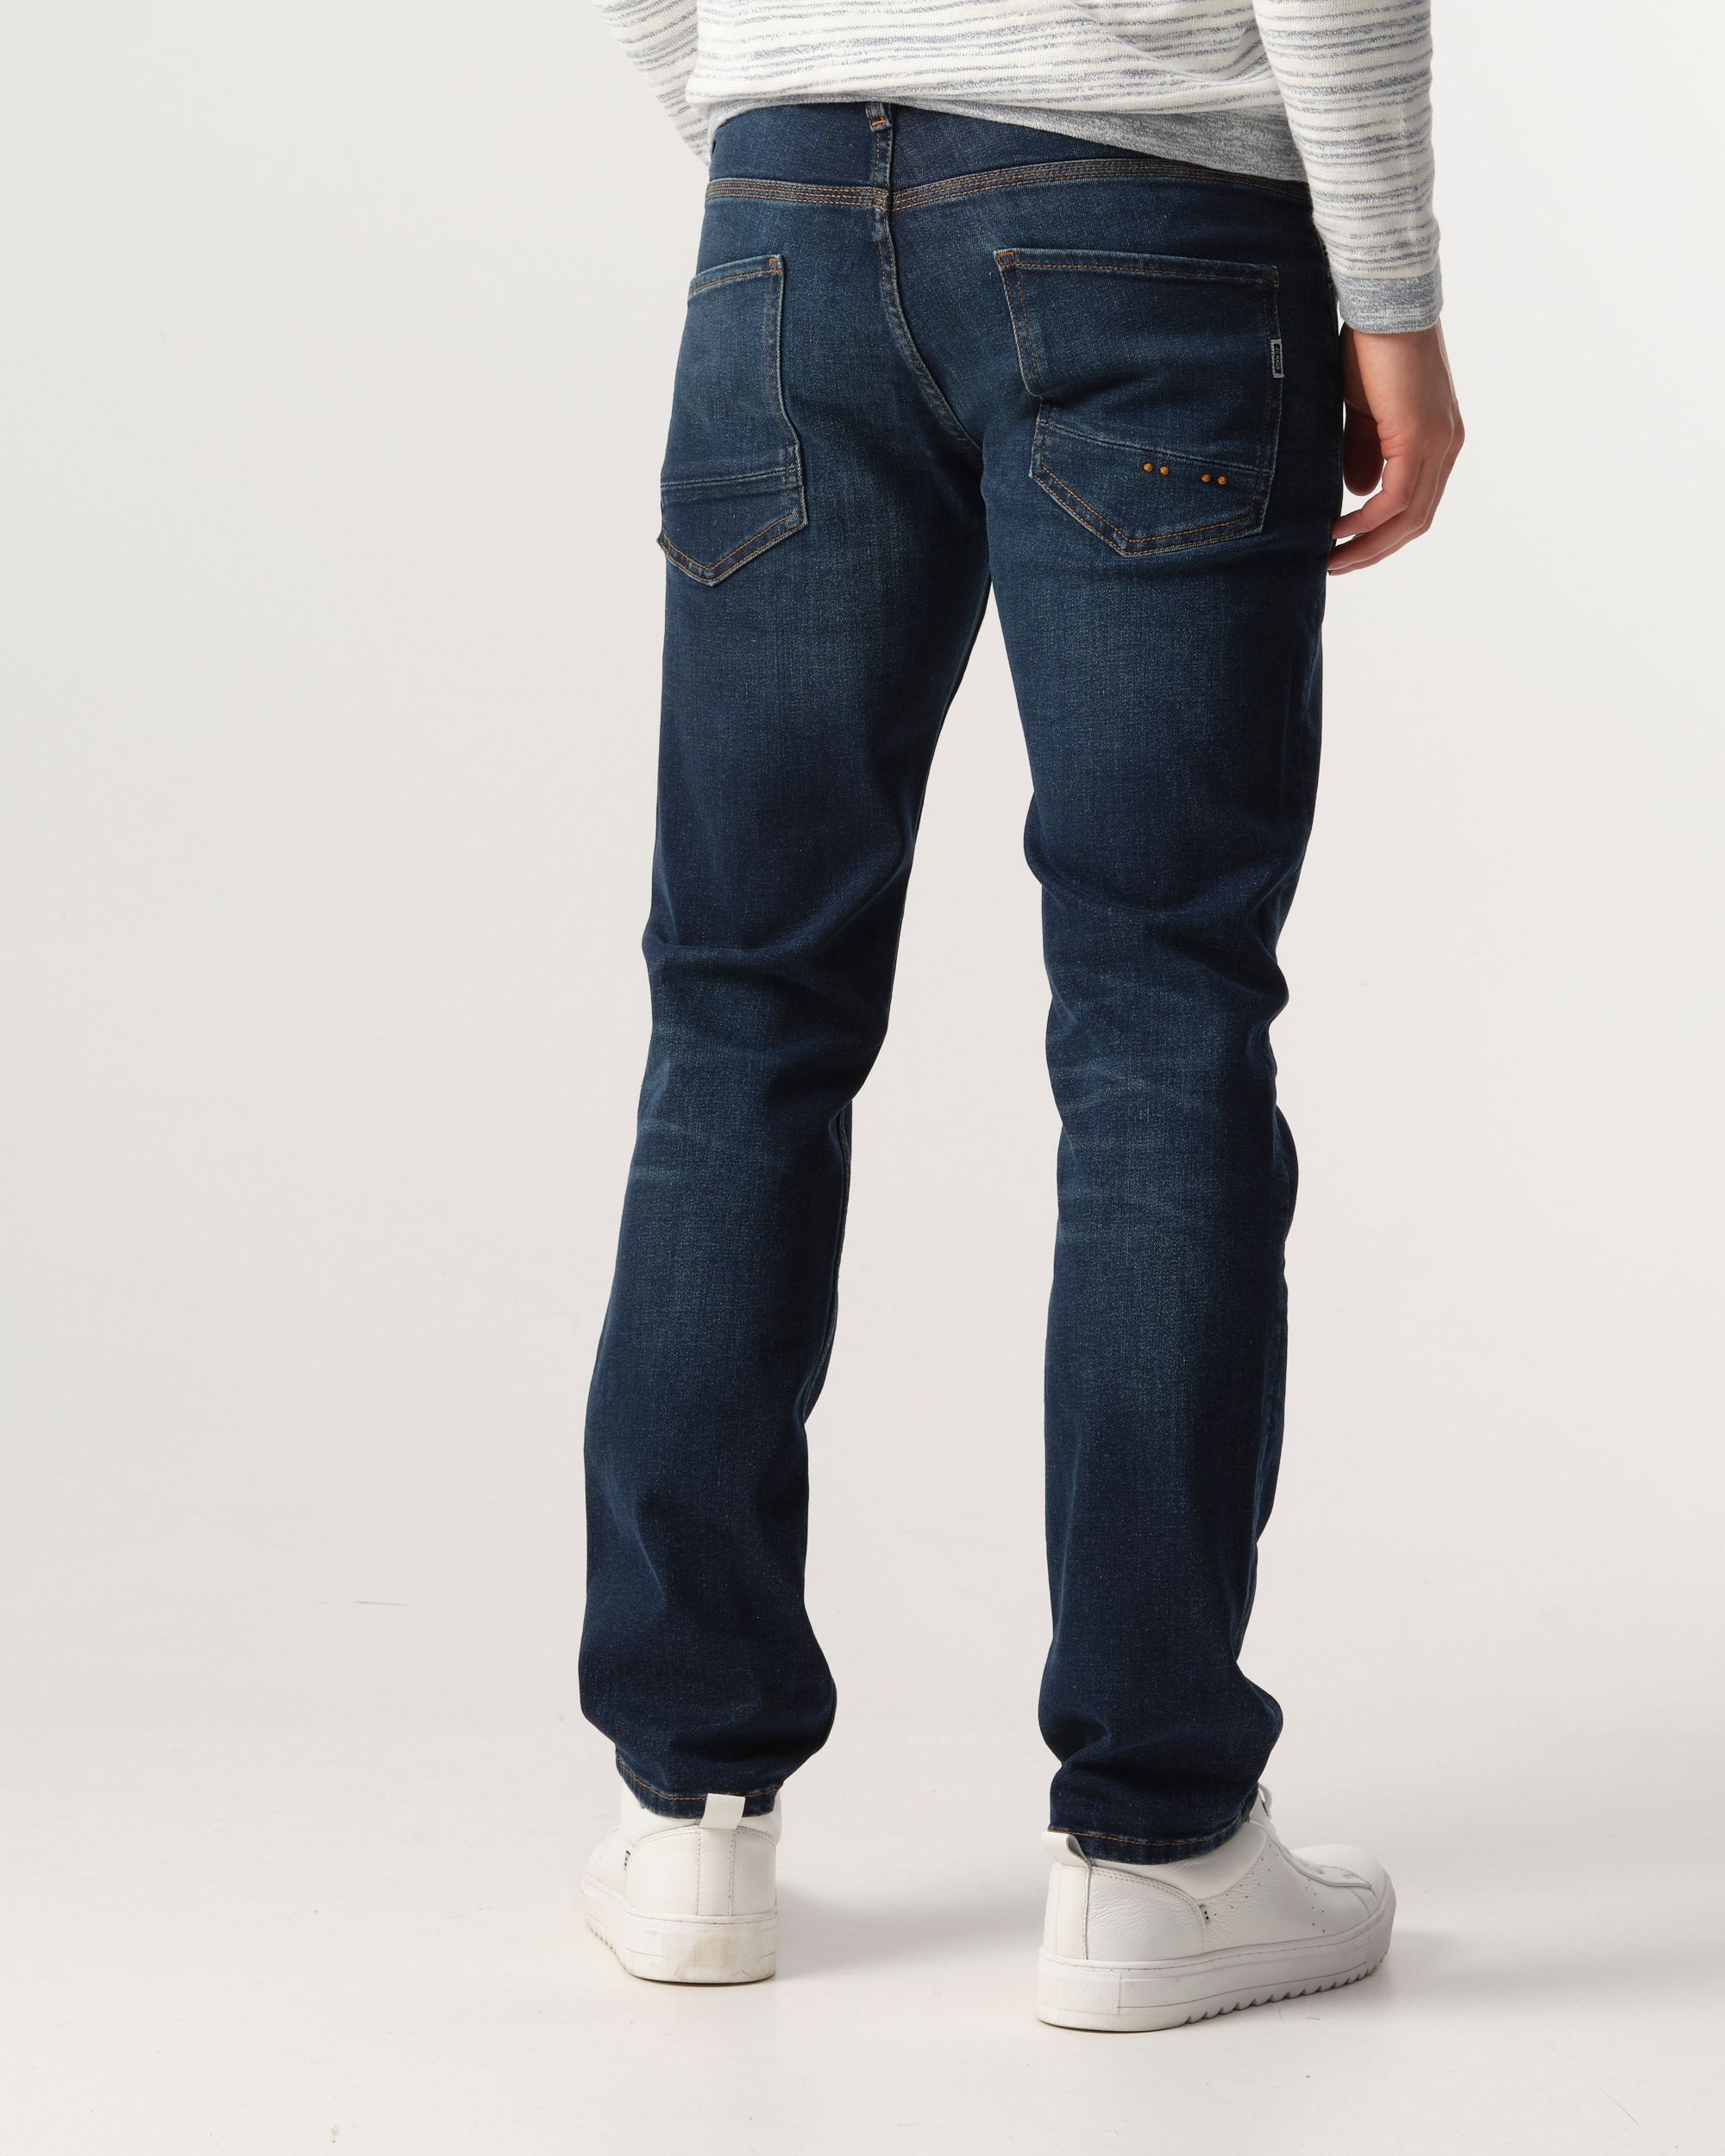 J.C. Rags Joah Heavy Washed Jeans NAVY 086000-001-29/32